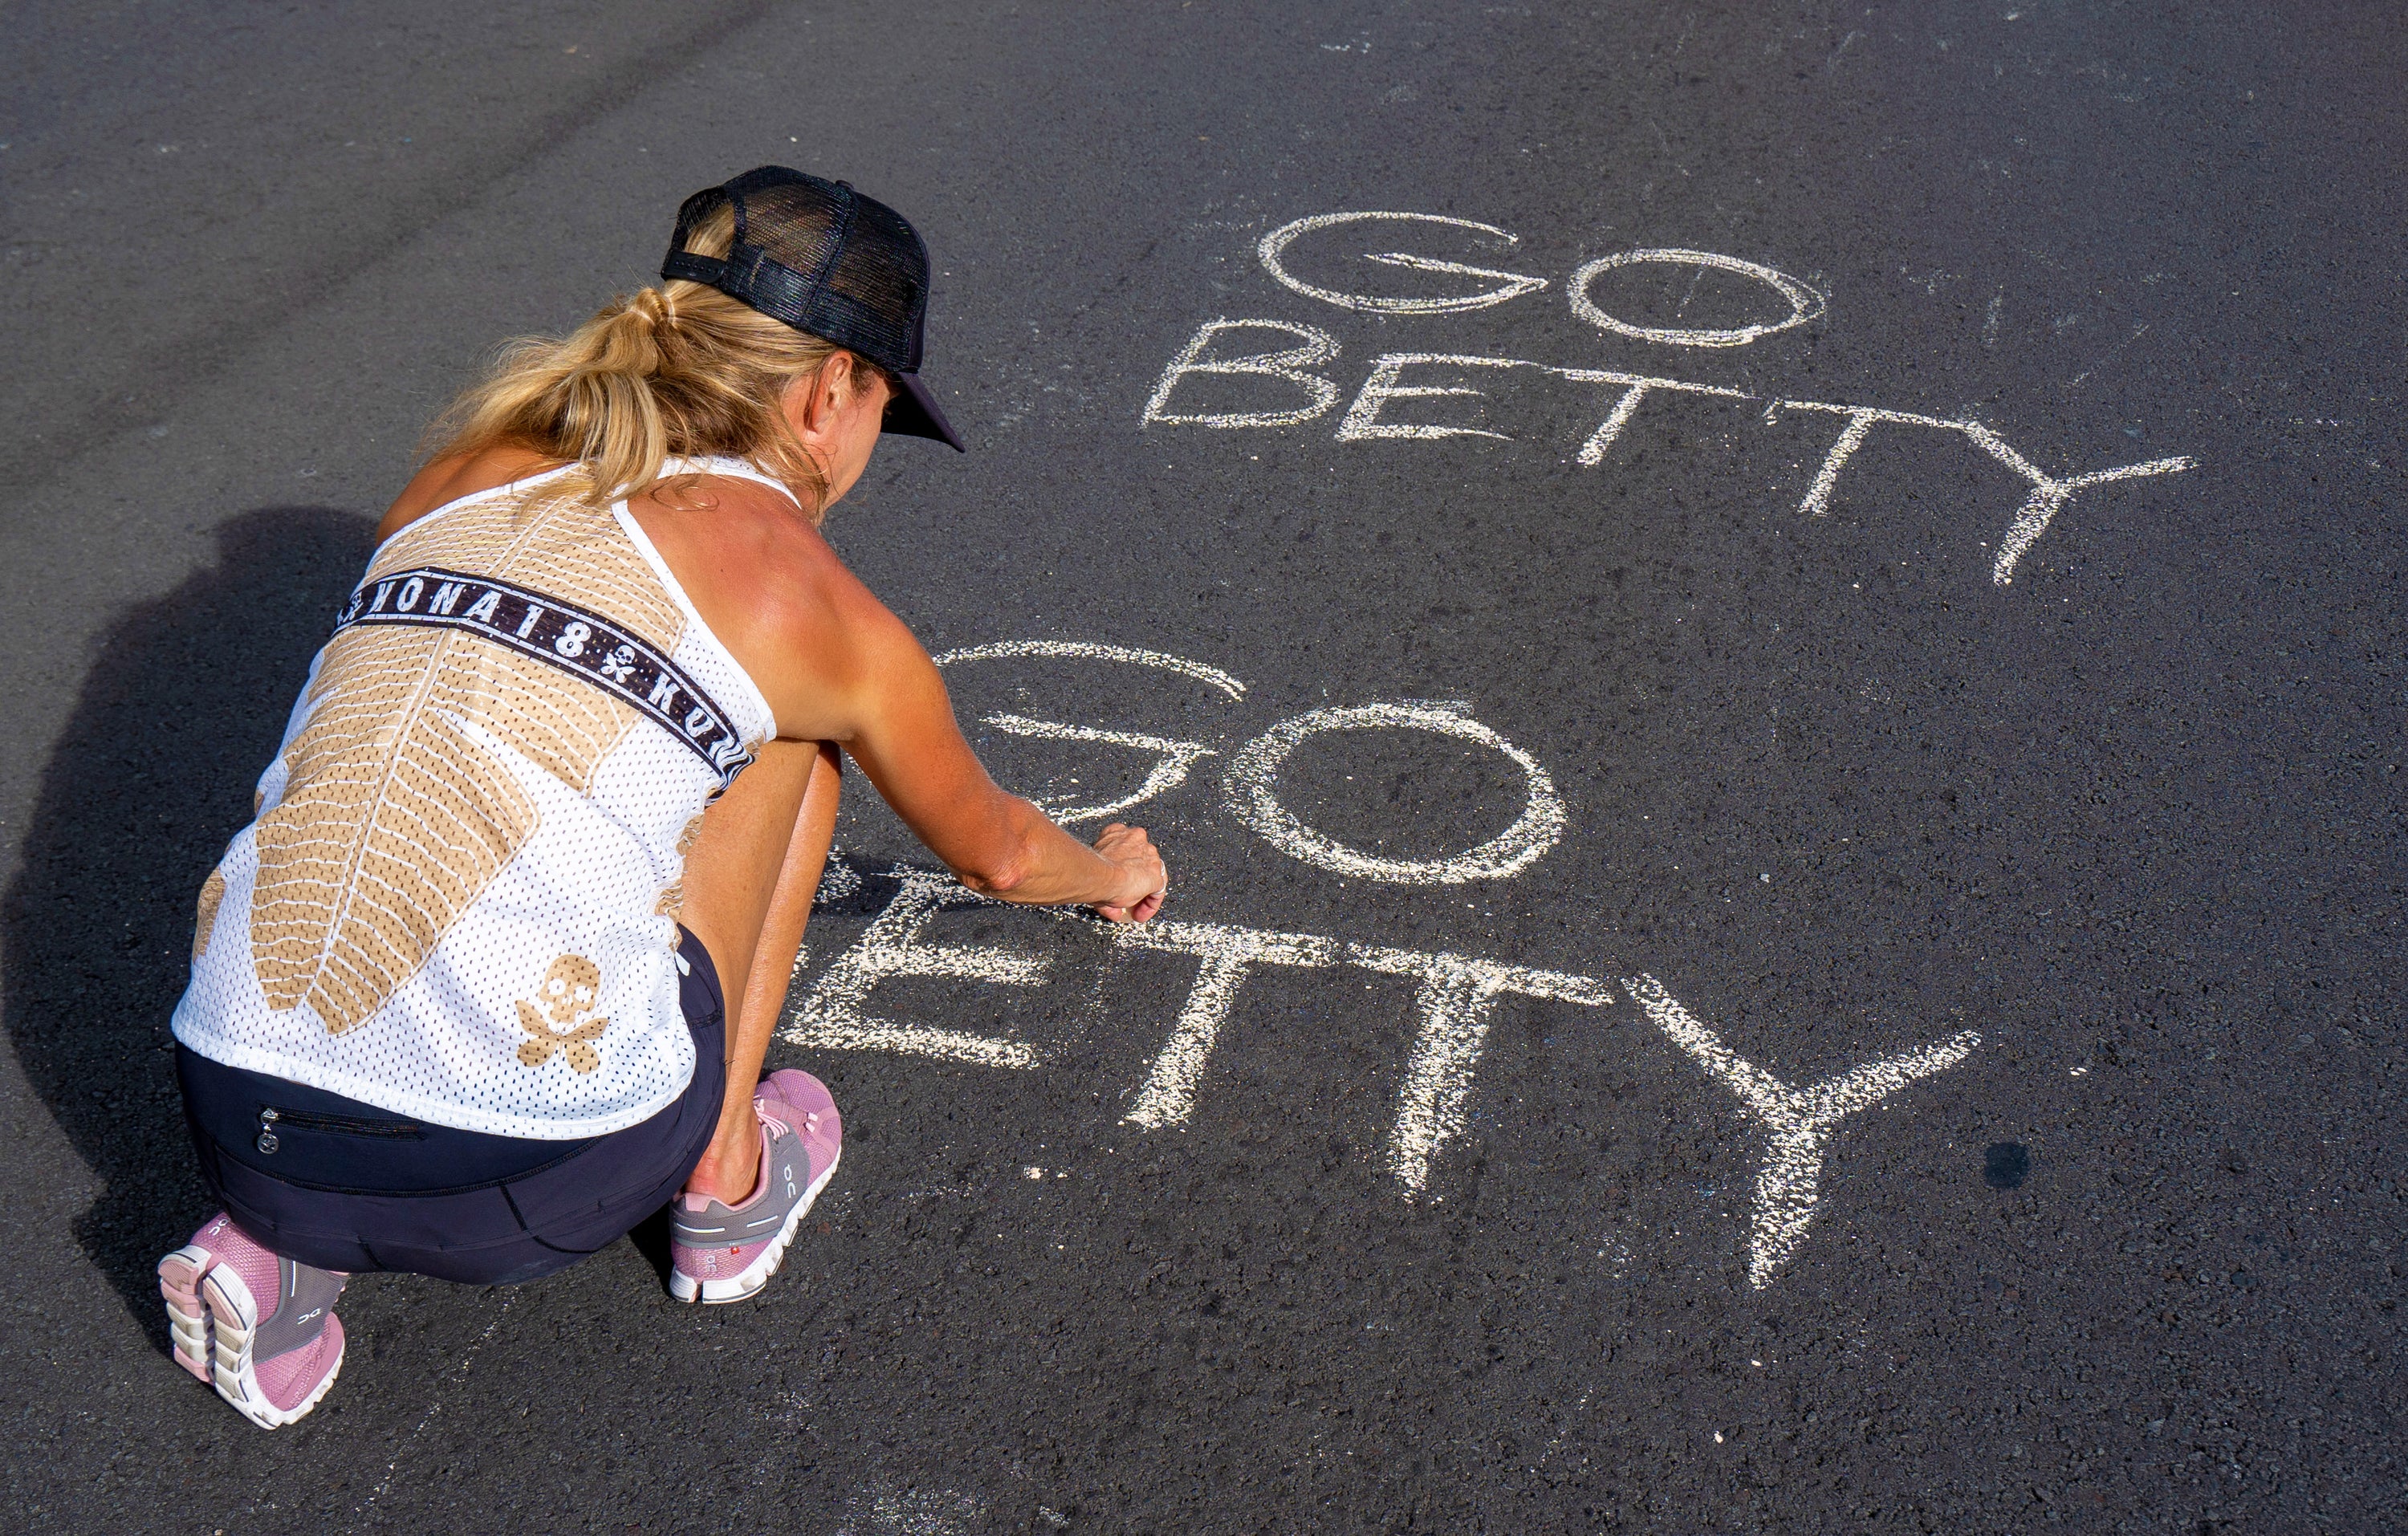 BETTYS IN KONA FOR THE IRONMAN WORLD CHAMPIONSHIP